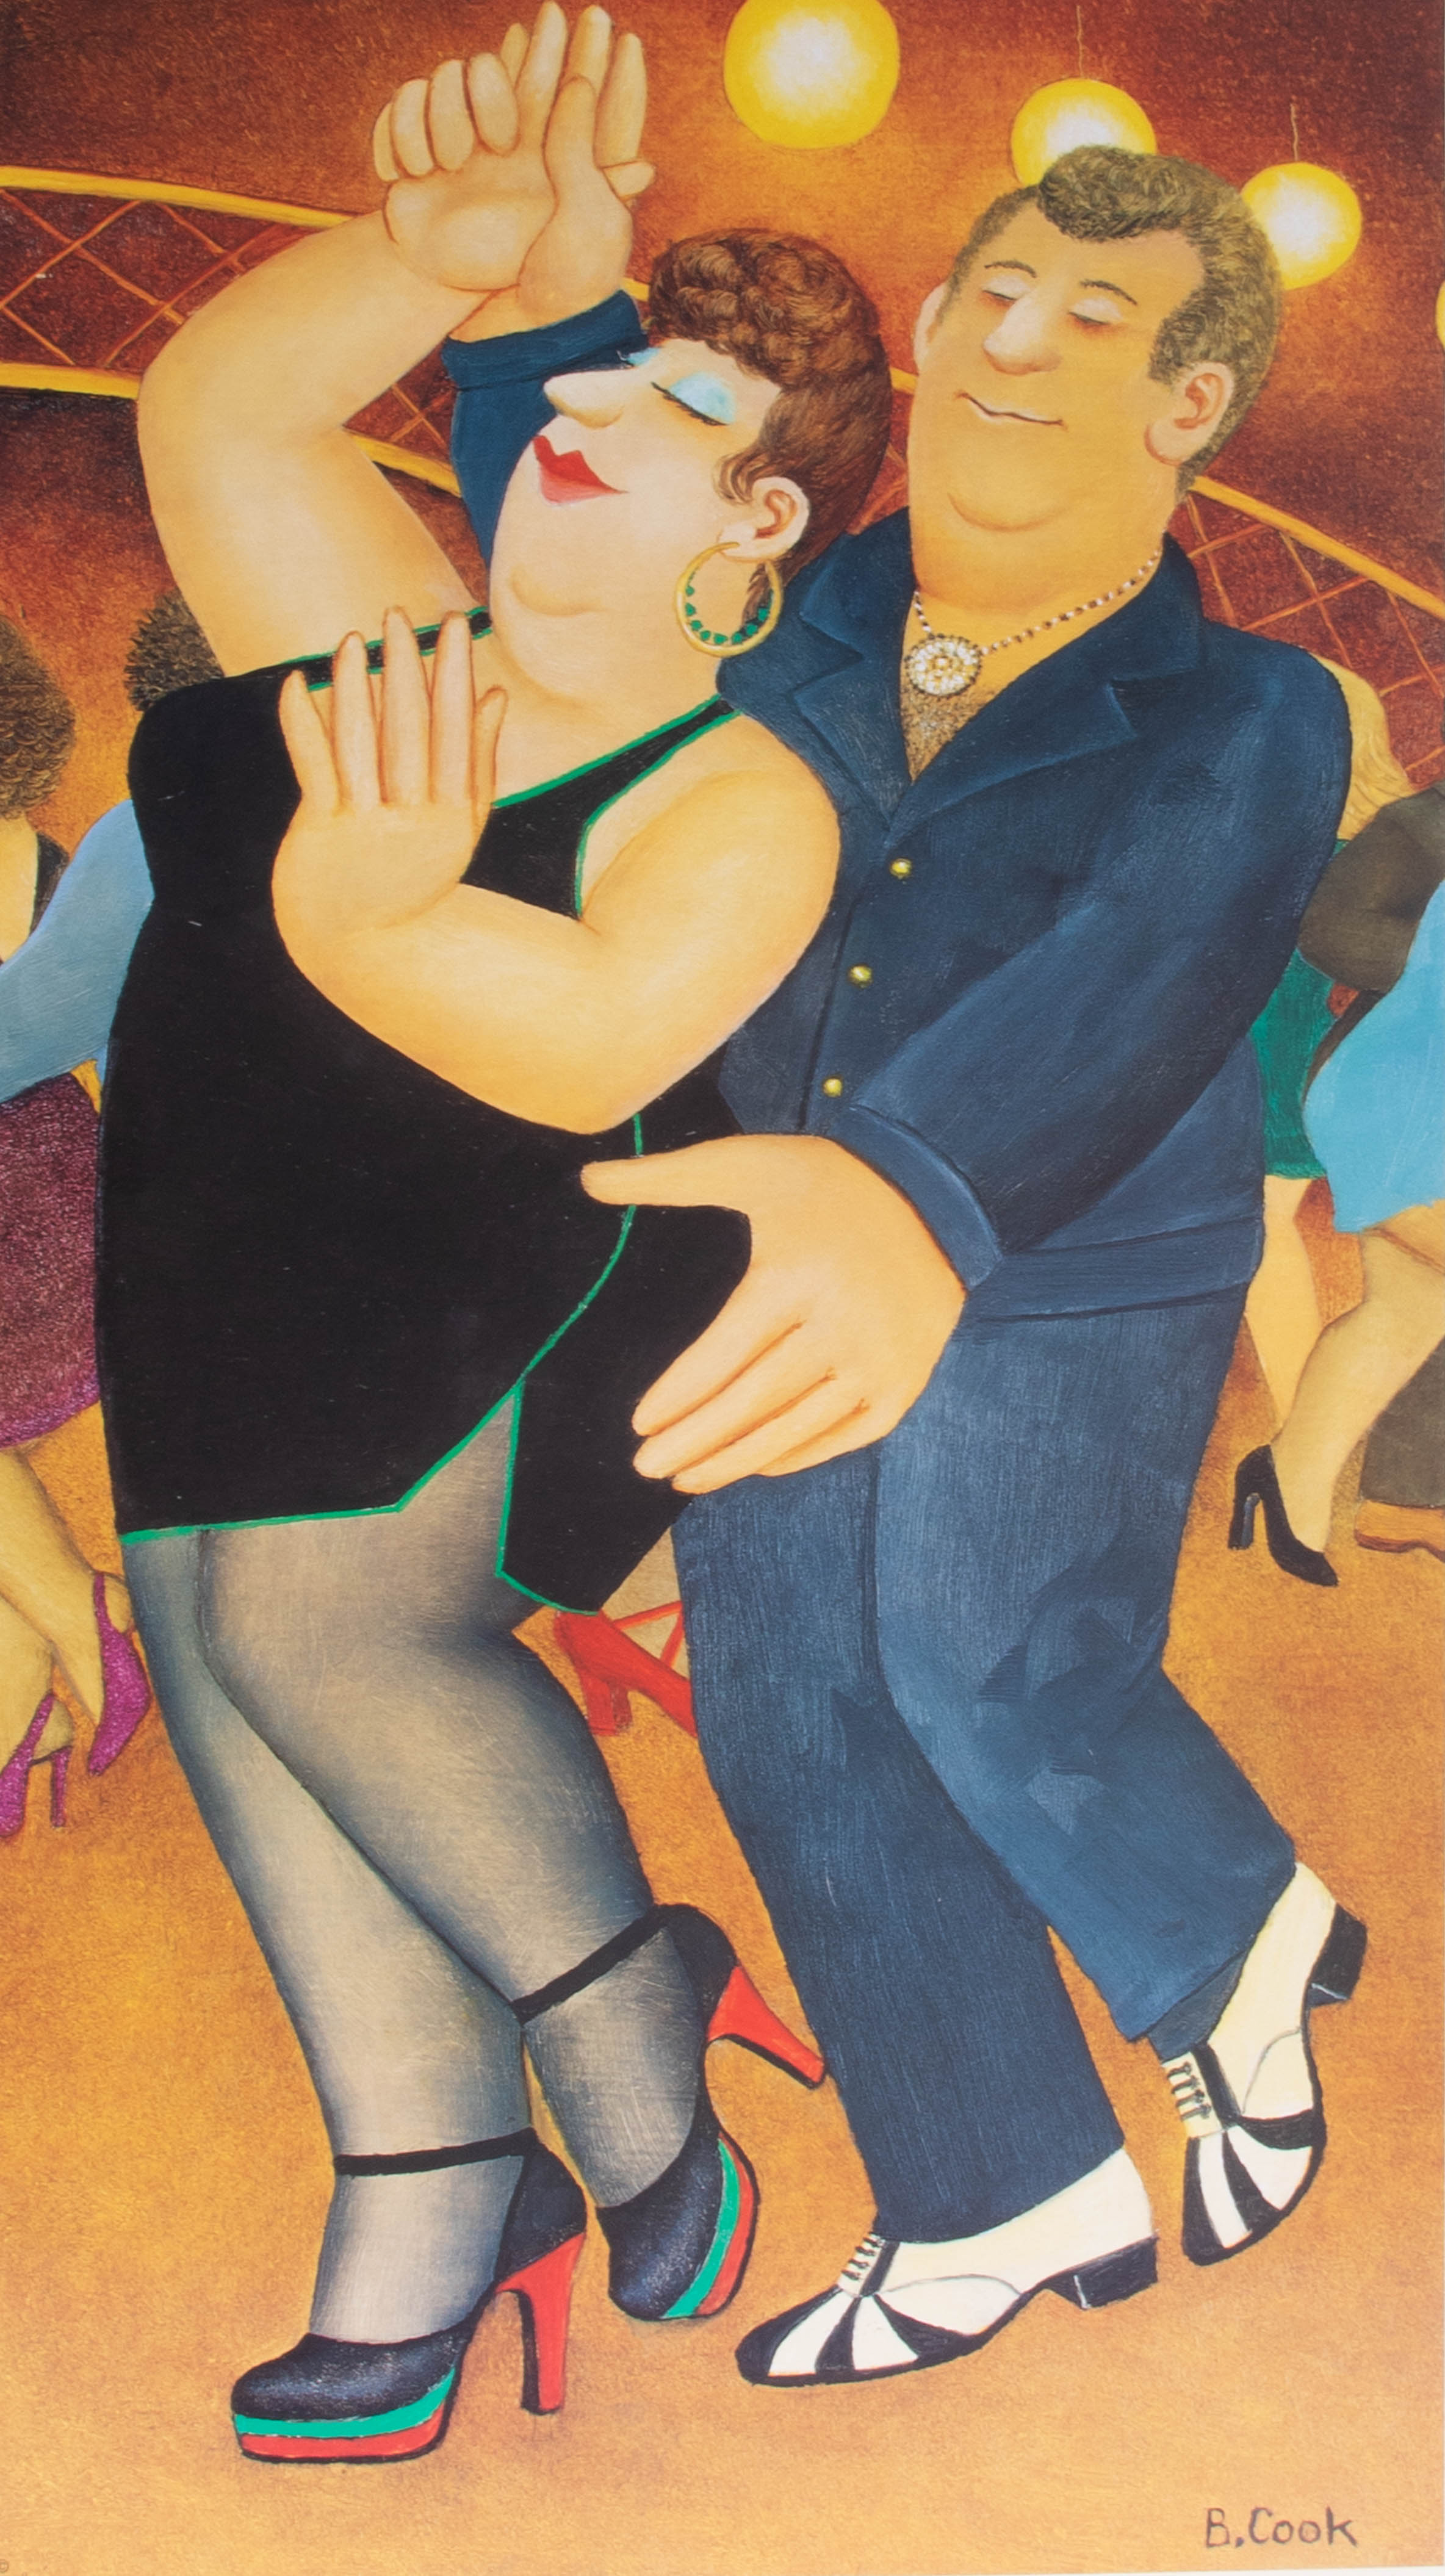 Beryl Cook (1926-2008), 'Dirty Dancing' signed limited edition print, No 595/650, published by - Image 2 of 2